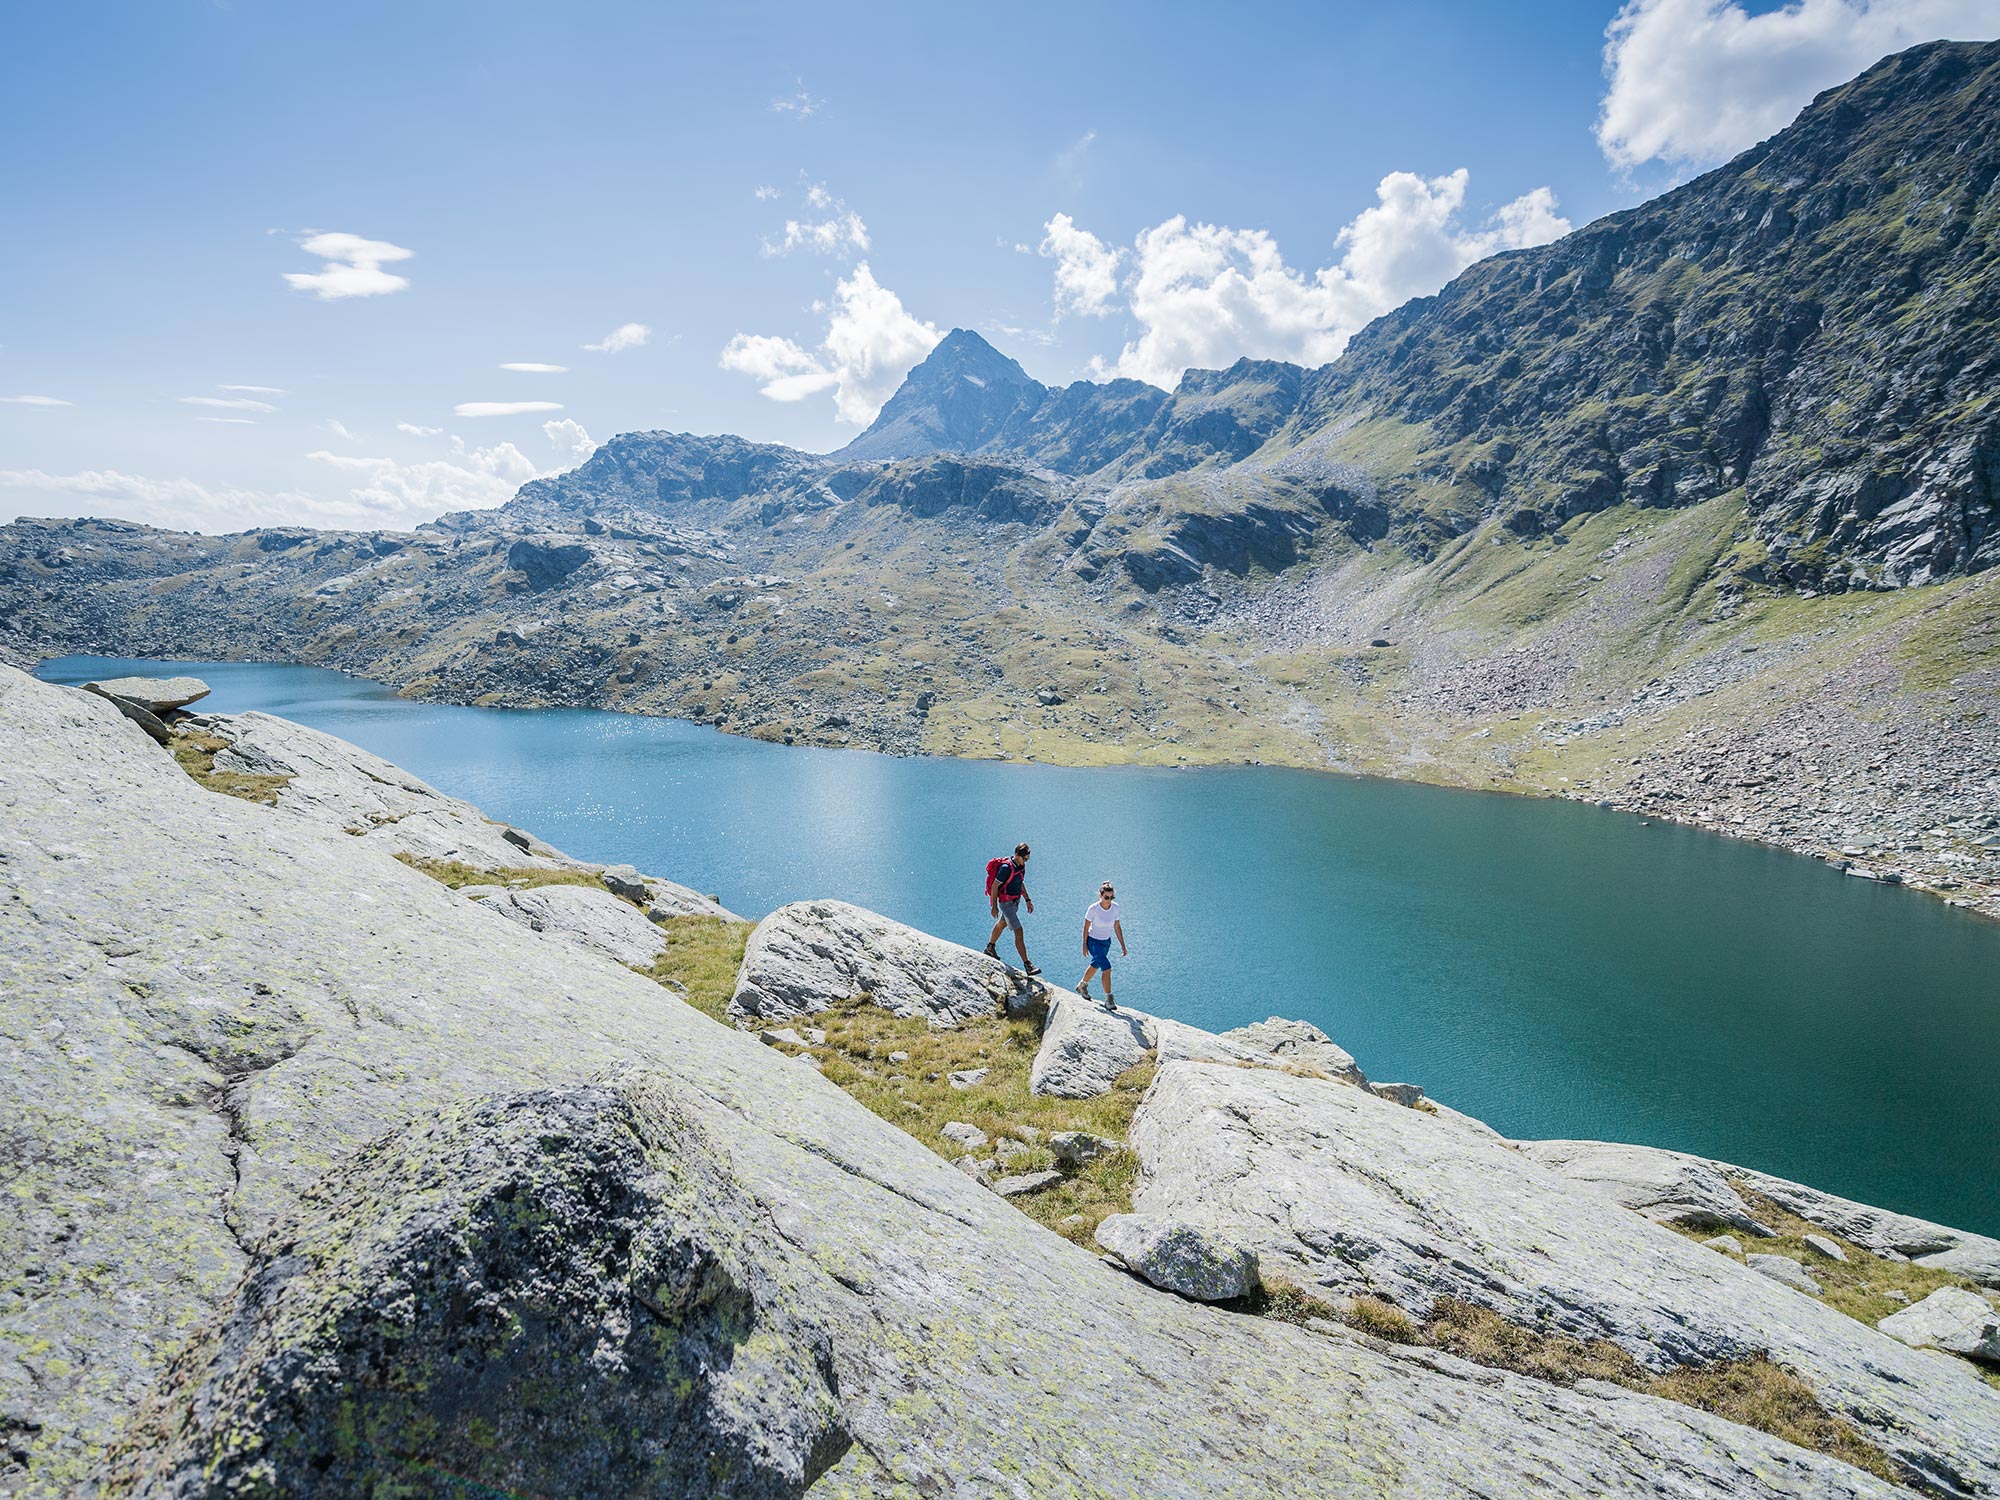 Spronser lakes in the Texel Group above Meran and Dorf Tirol